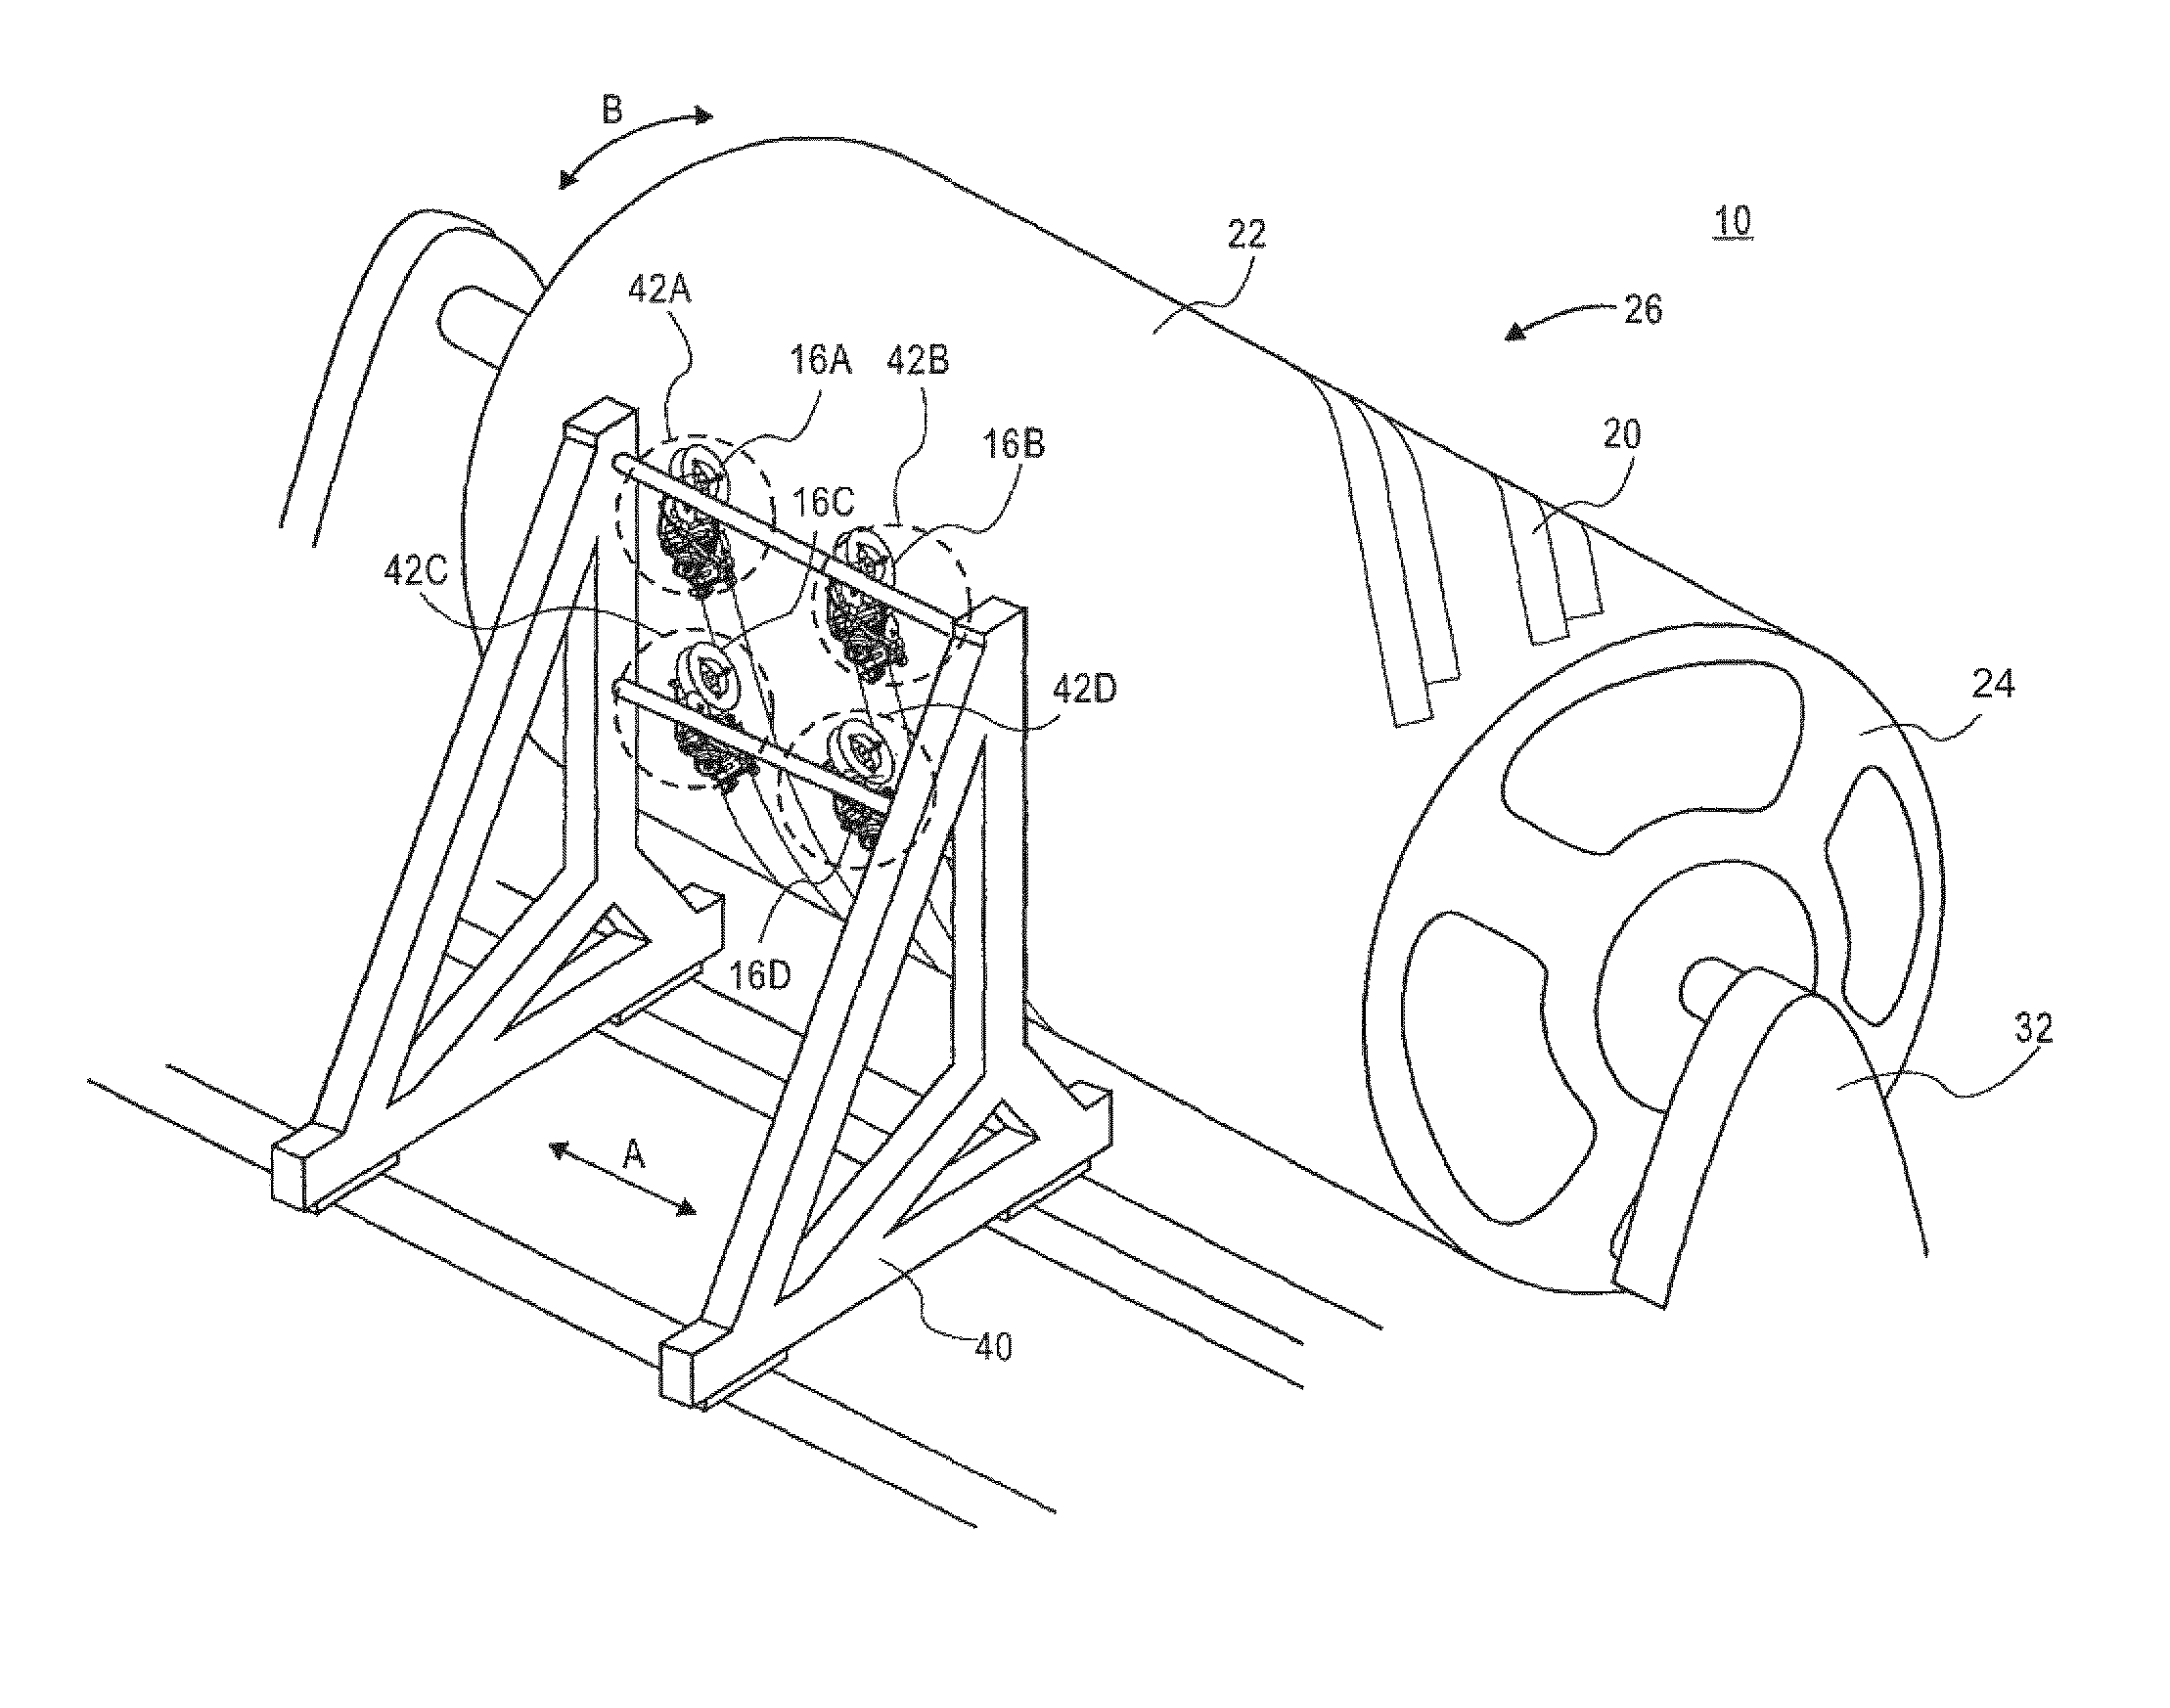 Vision inspection system device and method